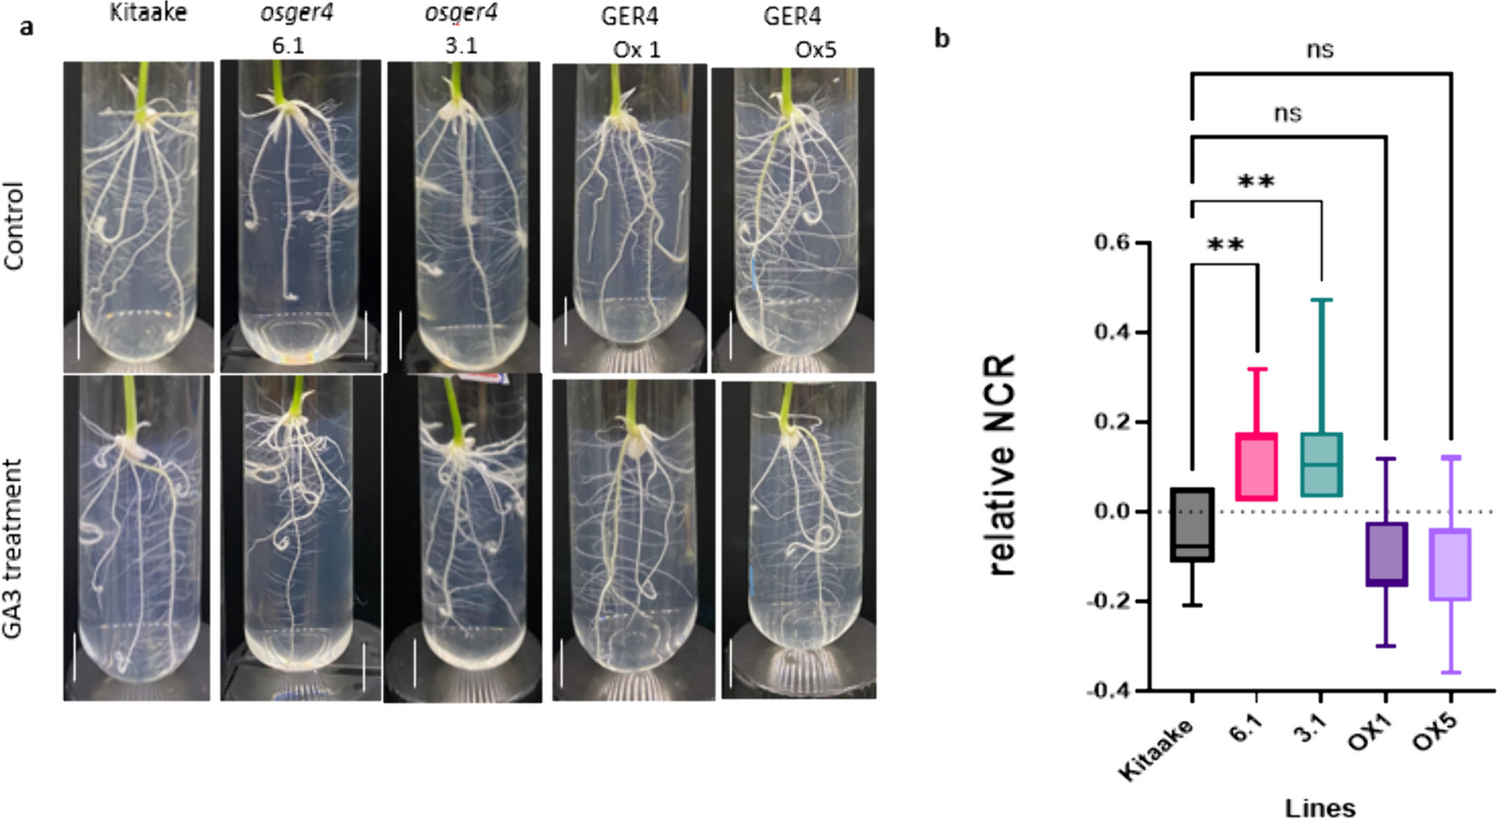 Effect of gibberellin on crown root development in the mutant of the rice plasmodesmal Germin-like protein OsGER4